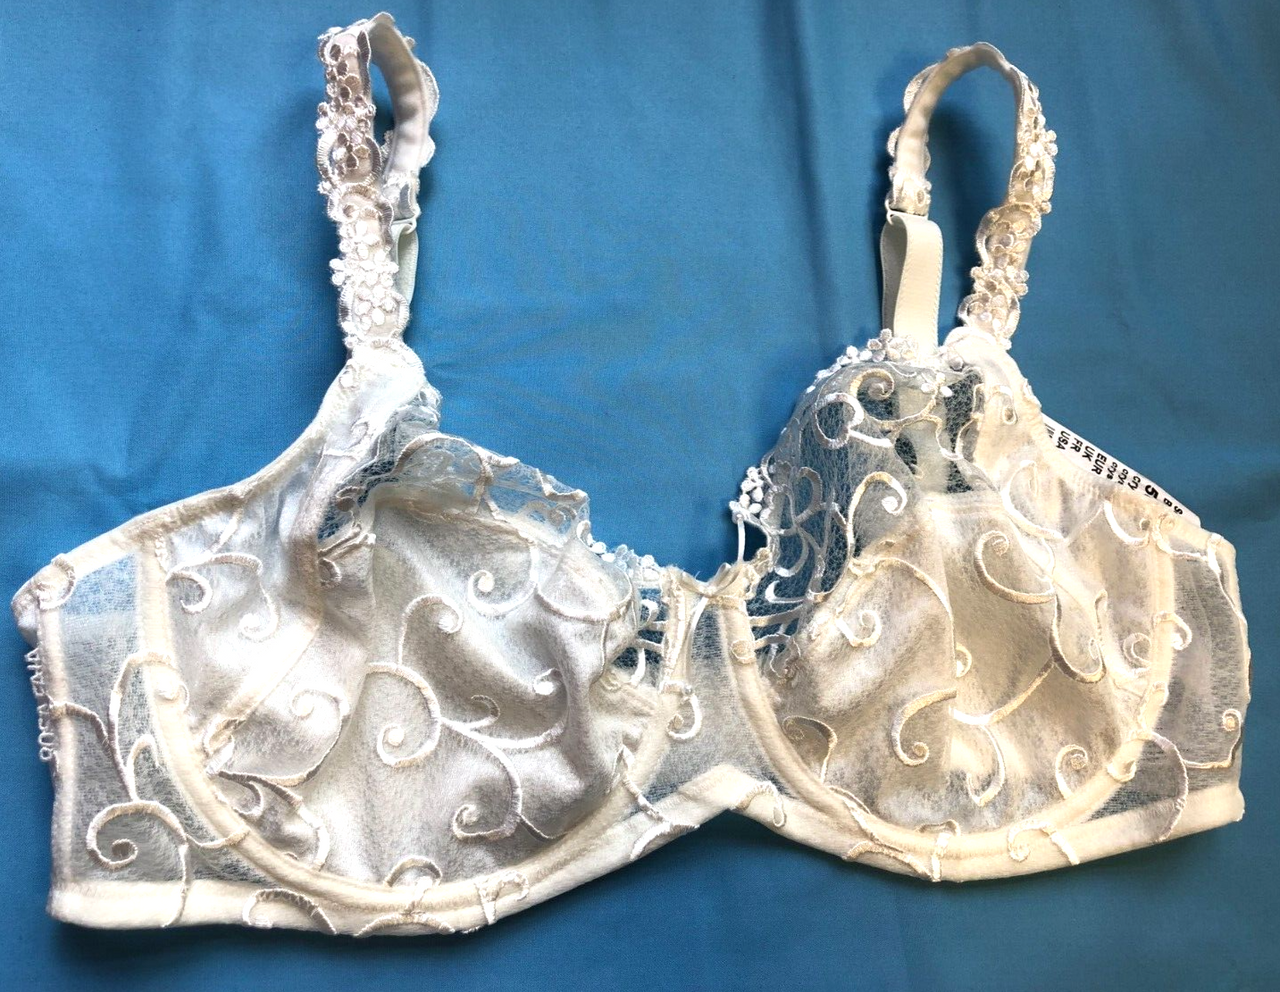 Rosa Faia Bra 38C Ivory Full Cup Underwired Non Padded Serie Vanella 5660  BNWT - Against Breast Cancer